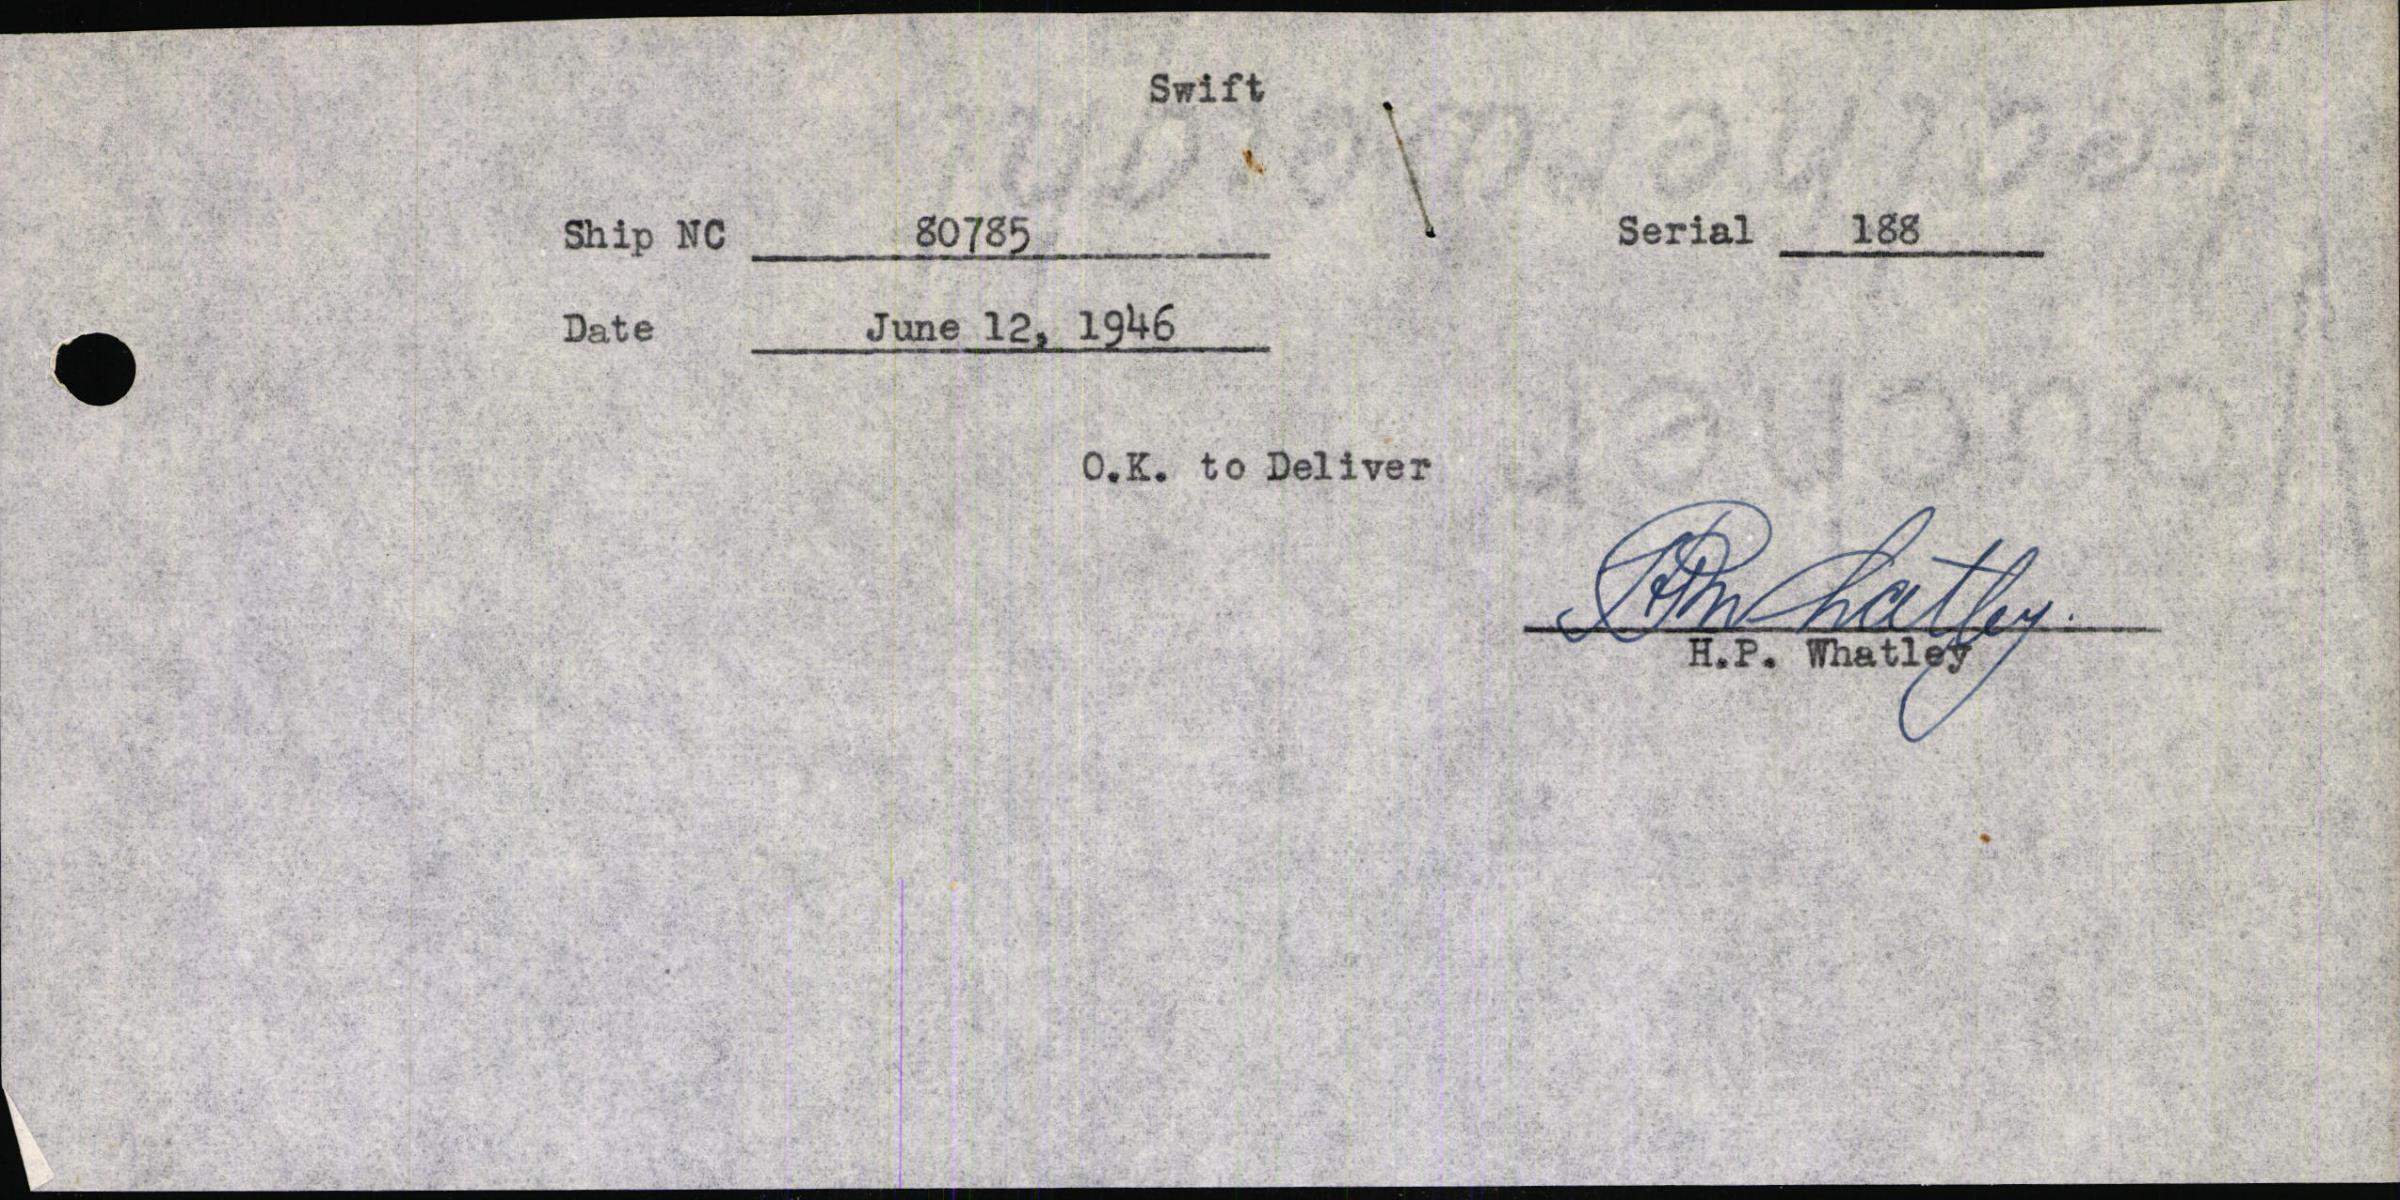 Sample page 3 from AirCorps Library document: Technical Information for Serial Number 188